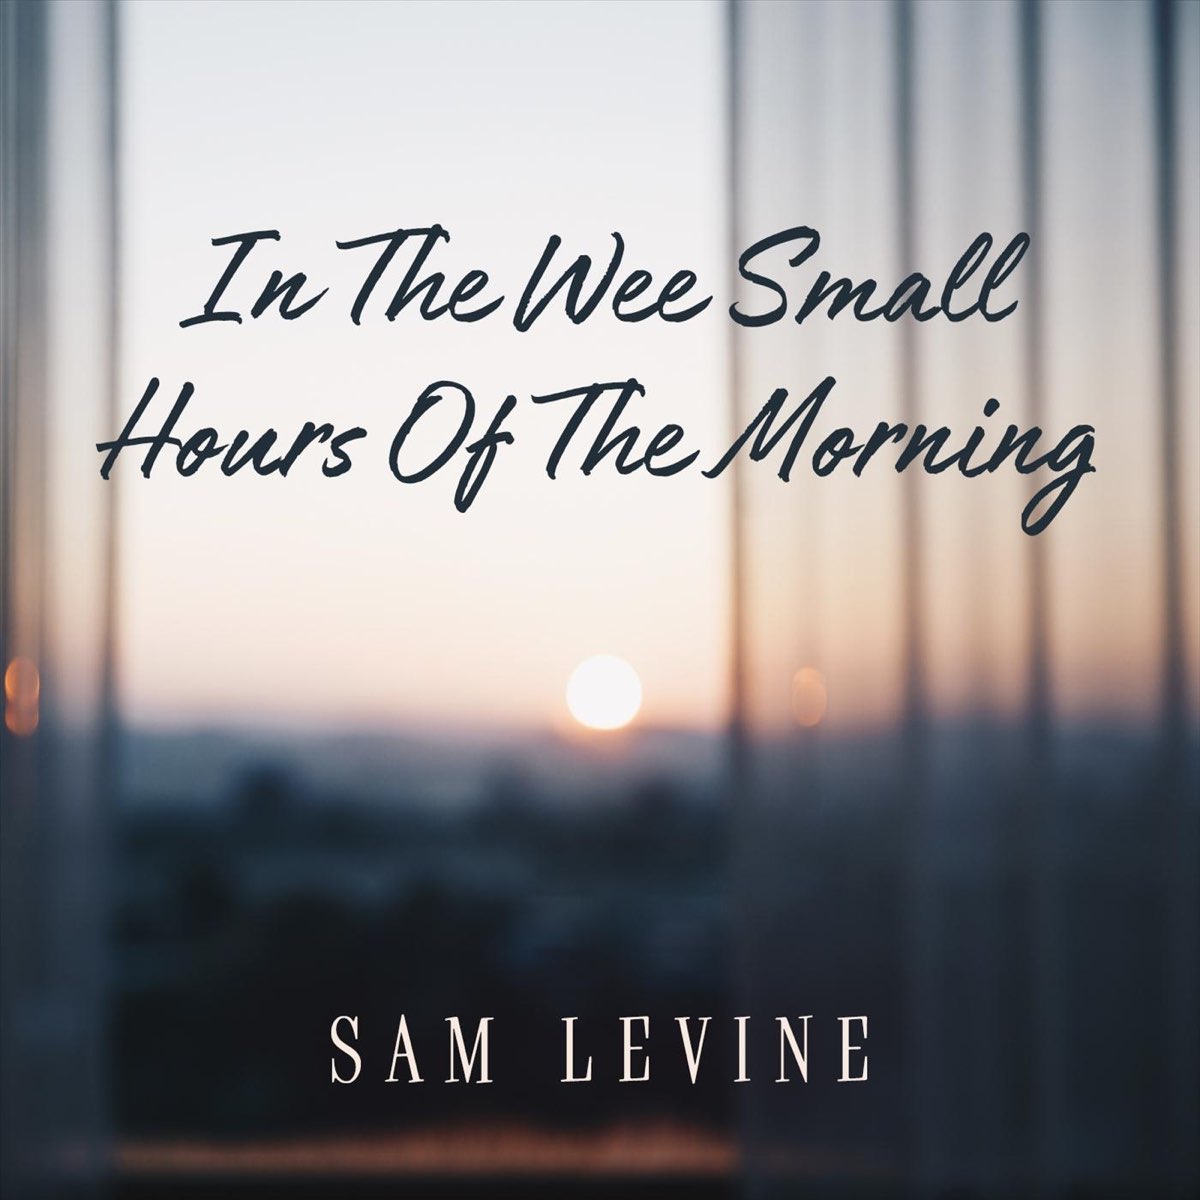 In the Wee small hours альбом. In the Wee small hours. Christmas hour - Sam Levine - amazing Grace. Small hours